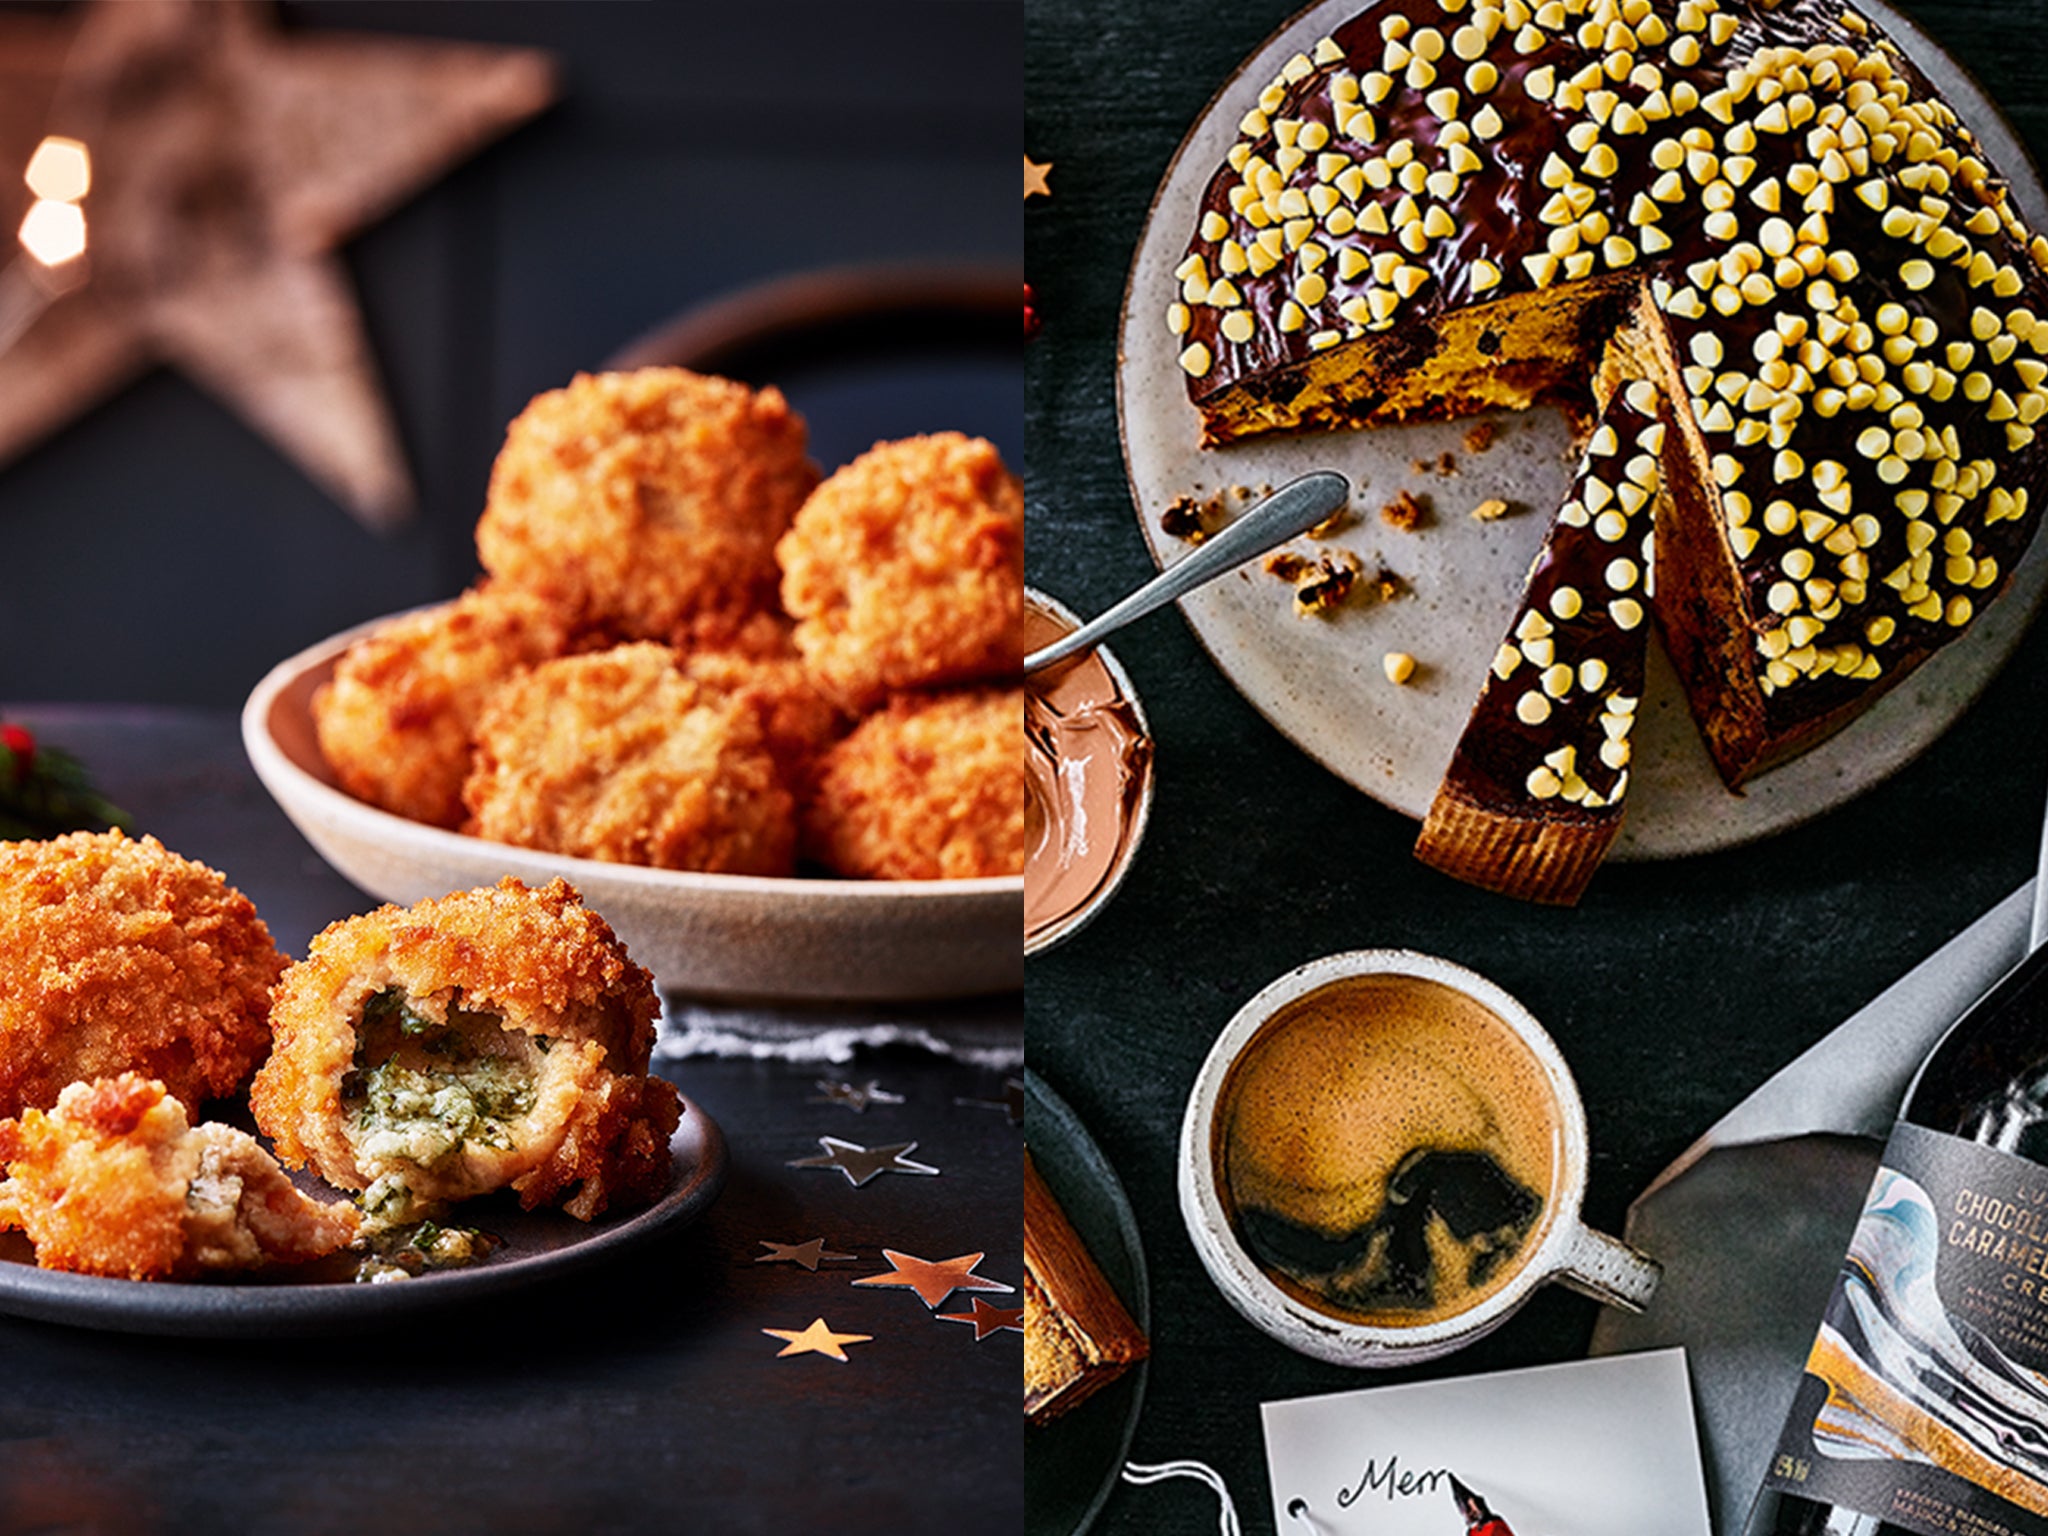 Whether you’re vegan or a meat-eater, Marks & Spencer has covered it all